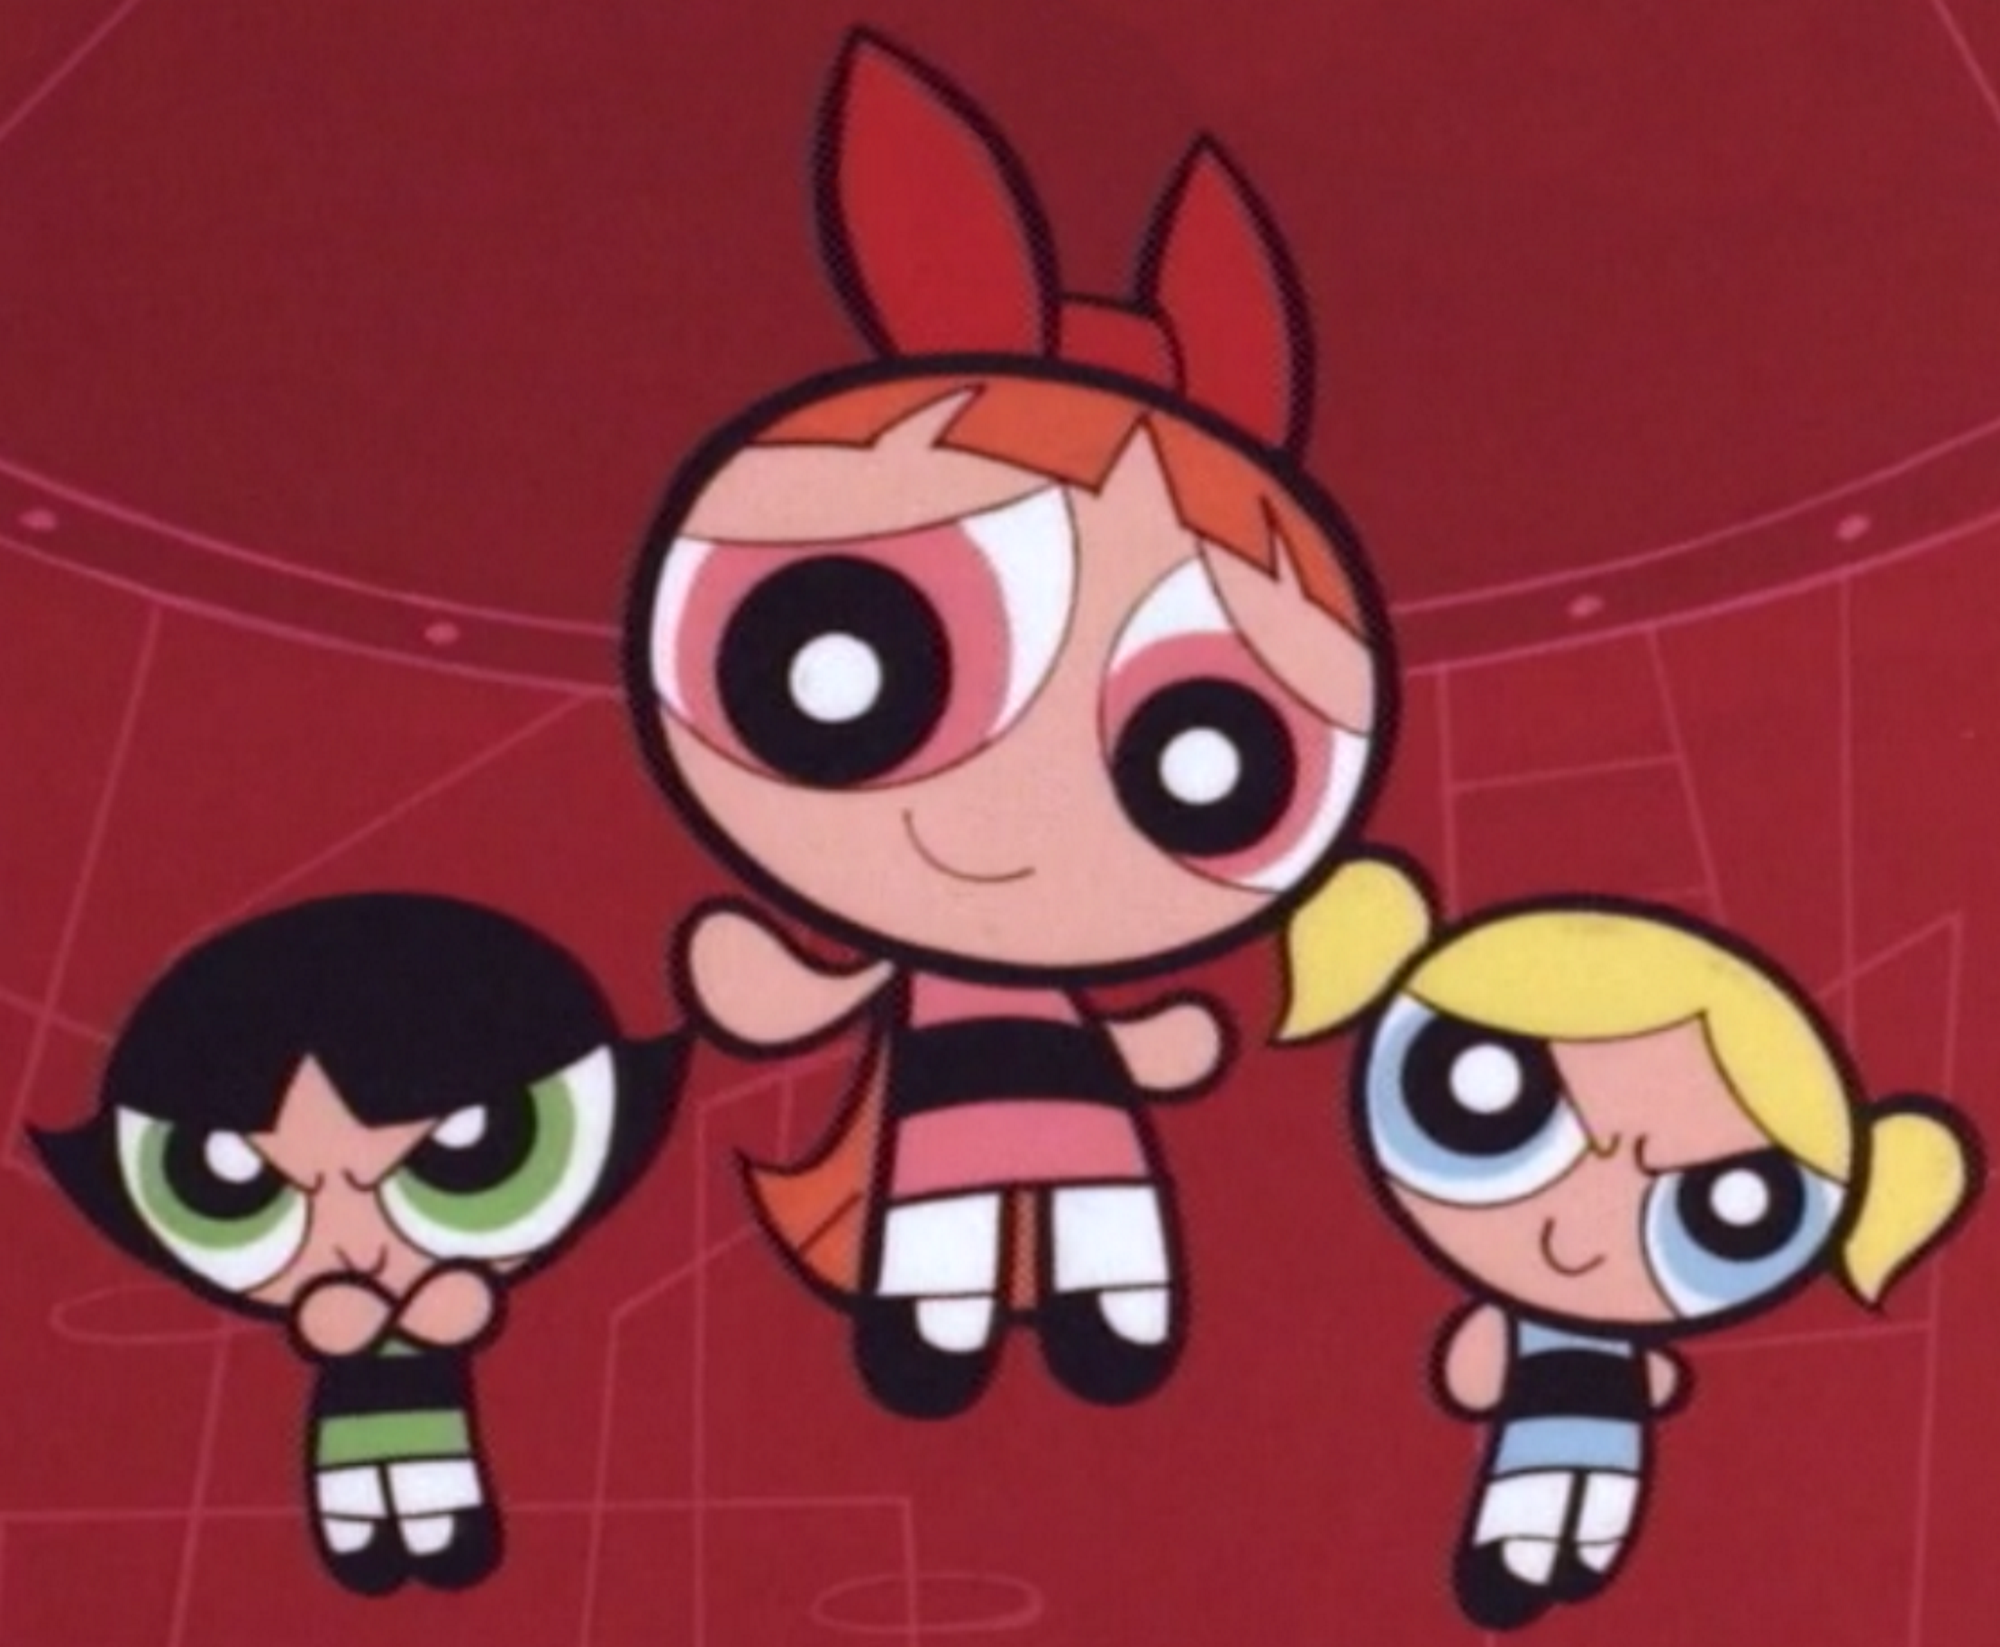 Image Ppg October 6 2000 Apng Powerpuff Girls Wiki Fandom Powered By Wikia